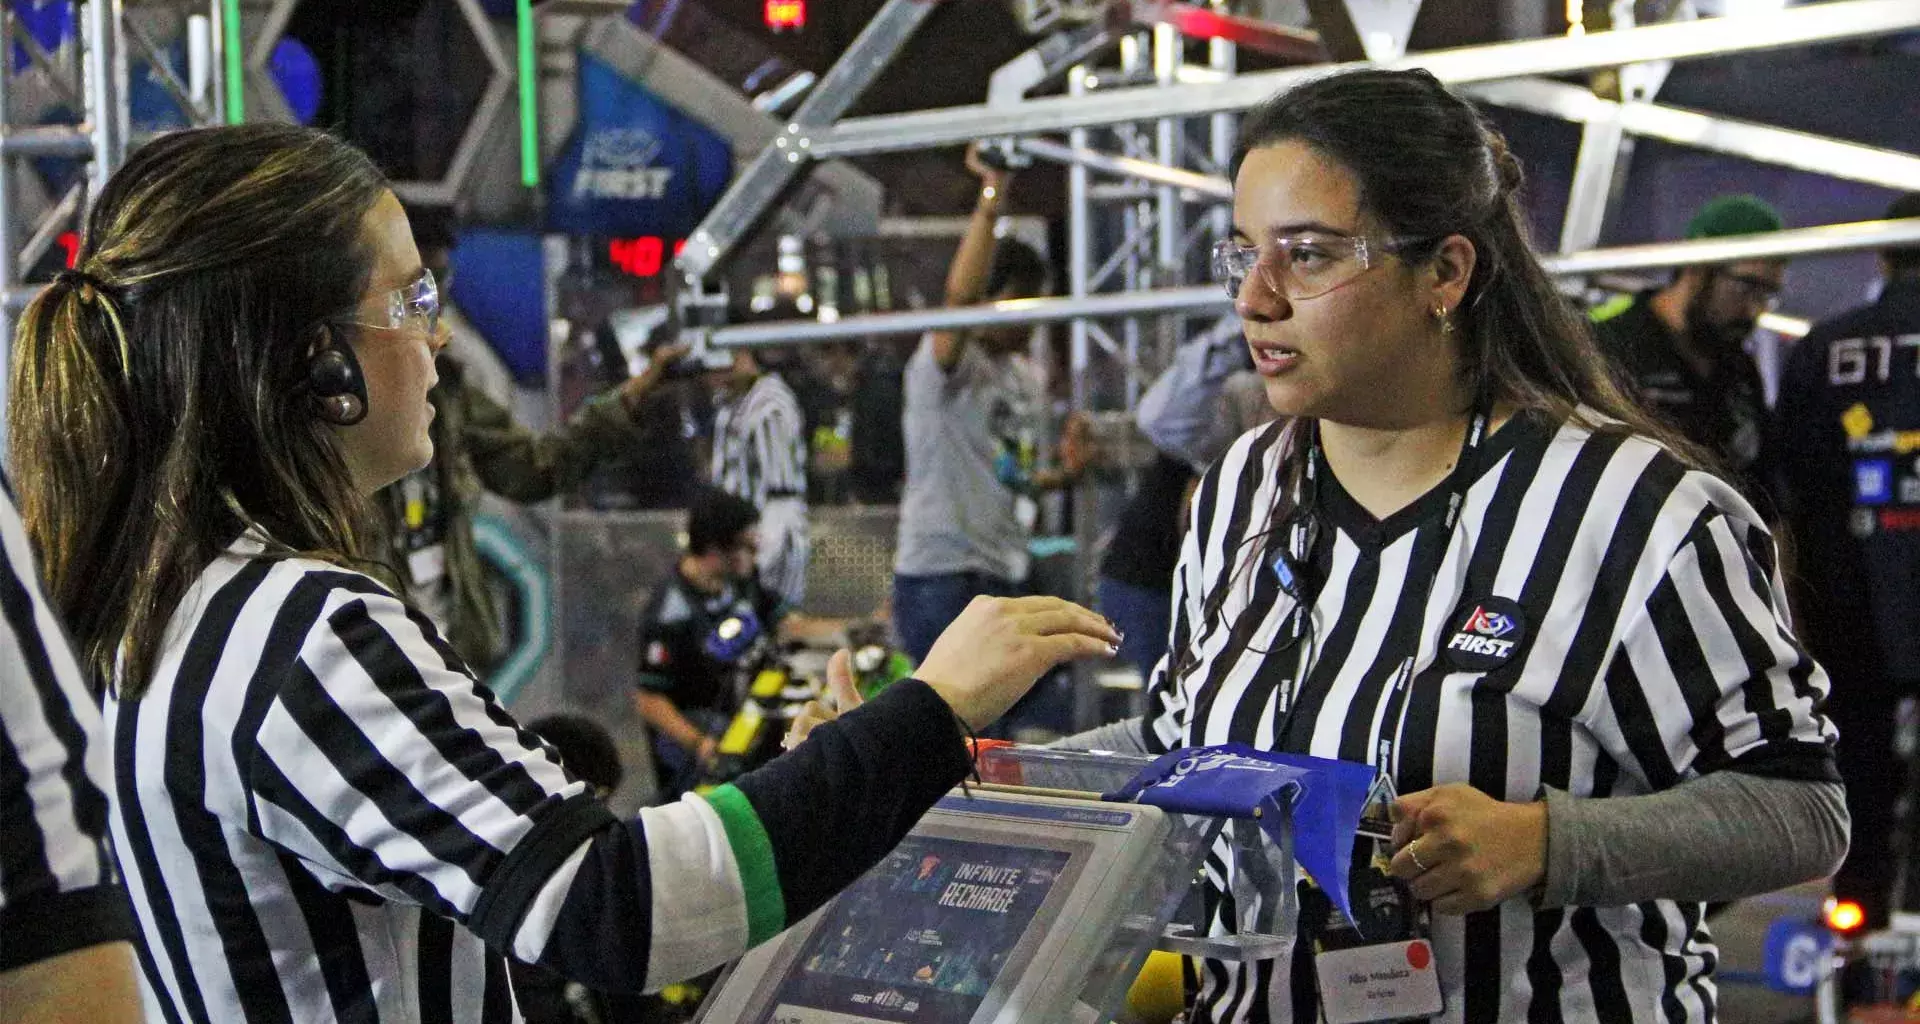 These women are the law in robotics: 4 female referees from the FIRST tournament